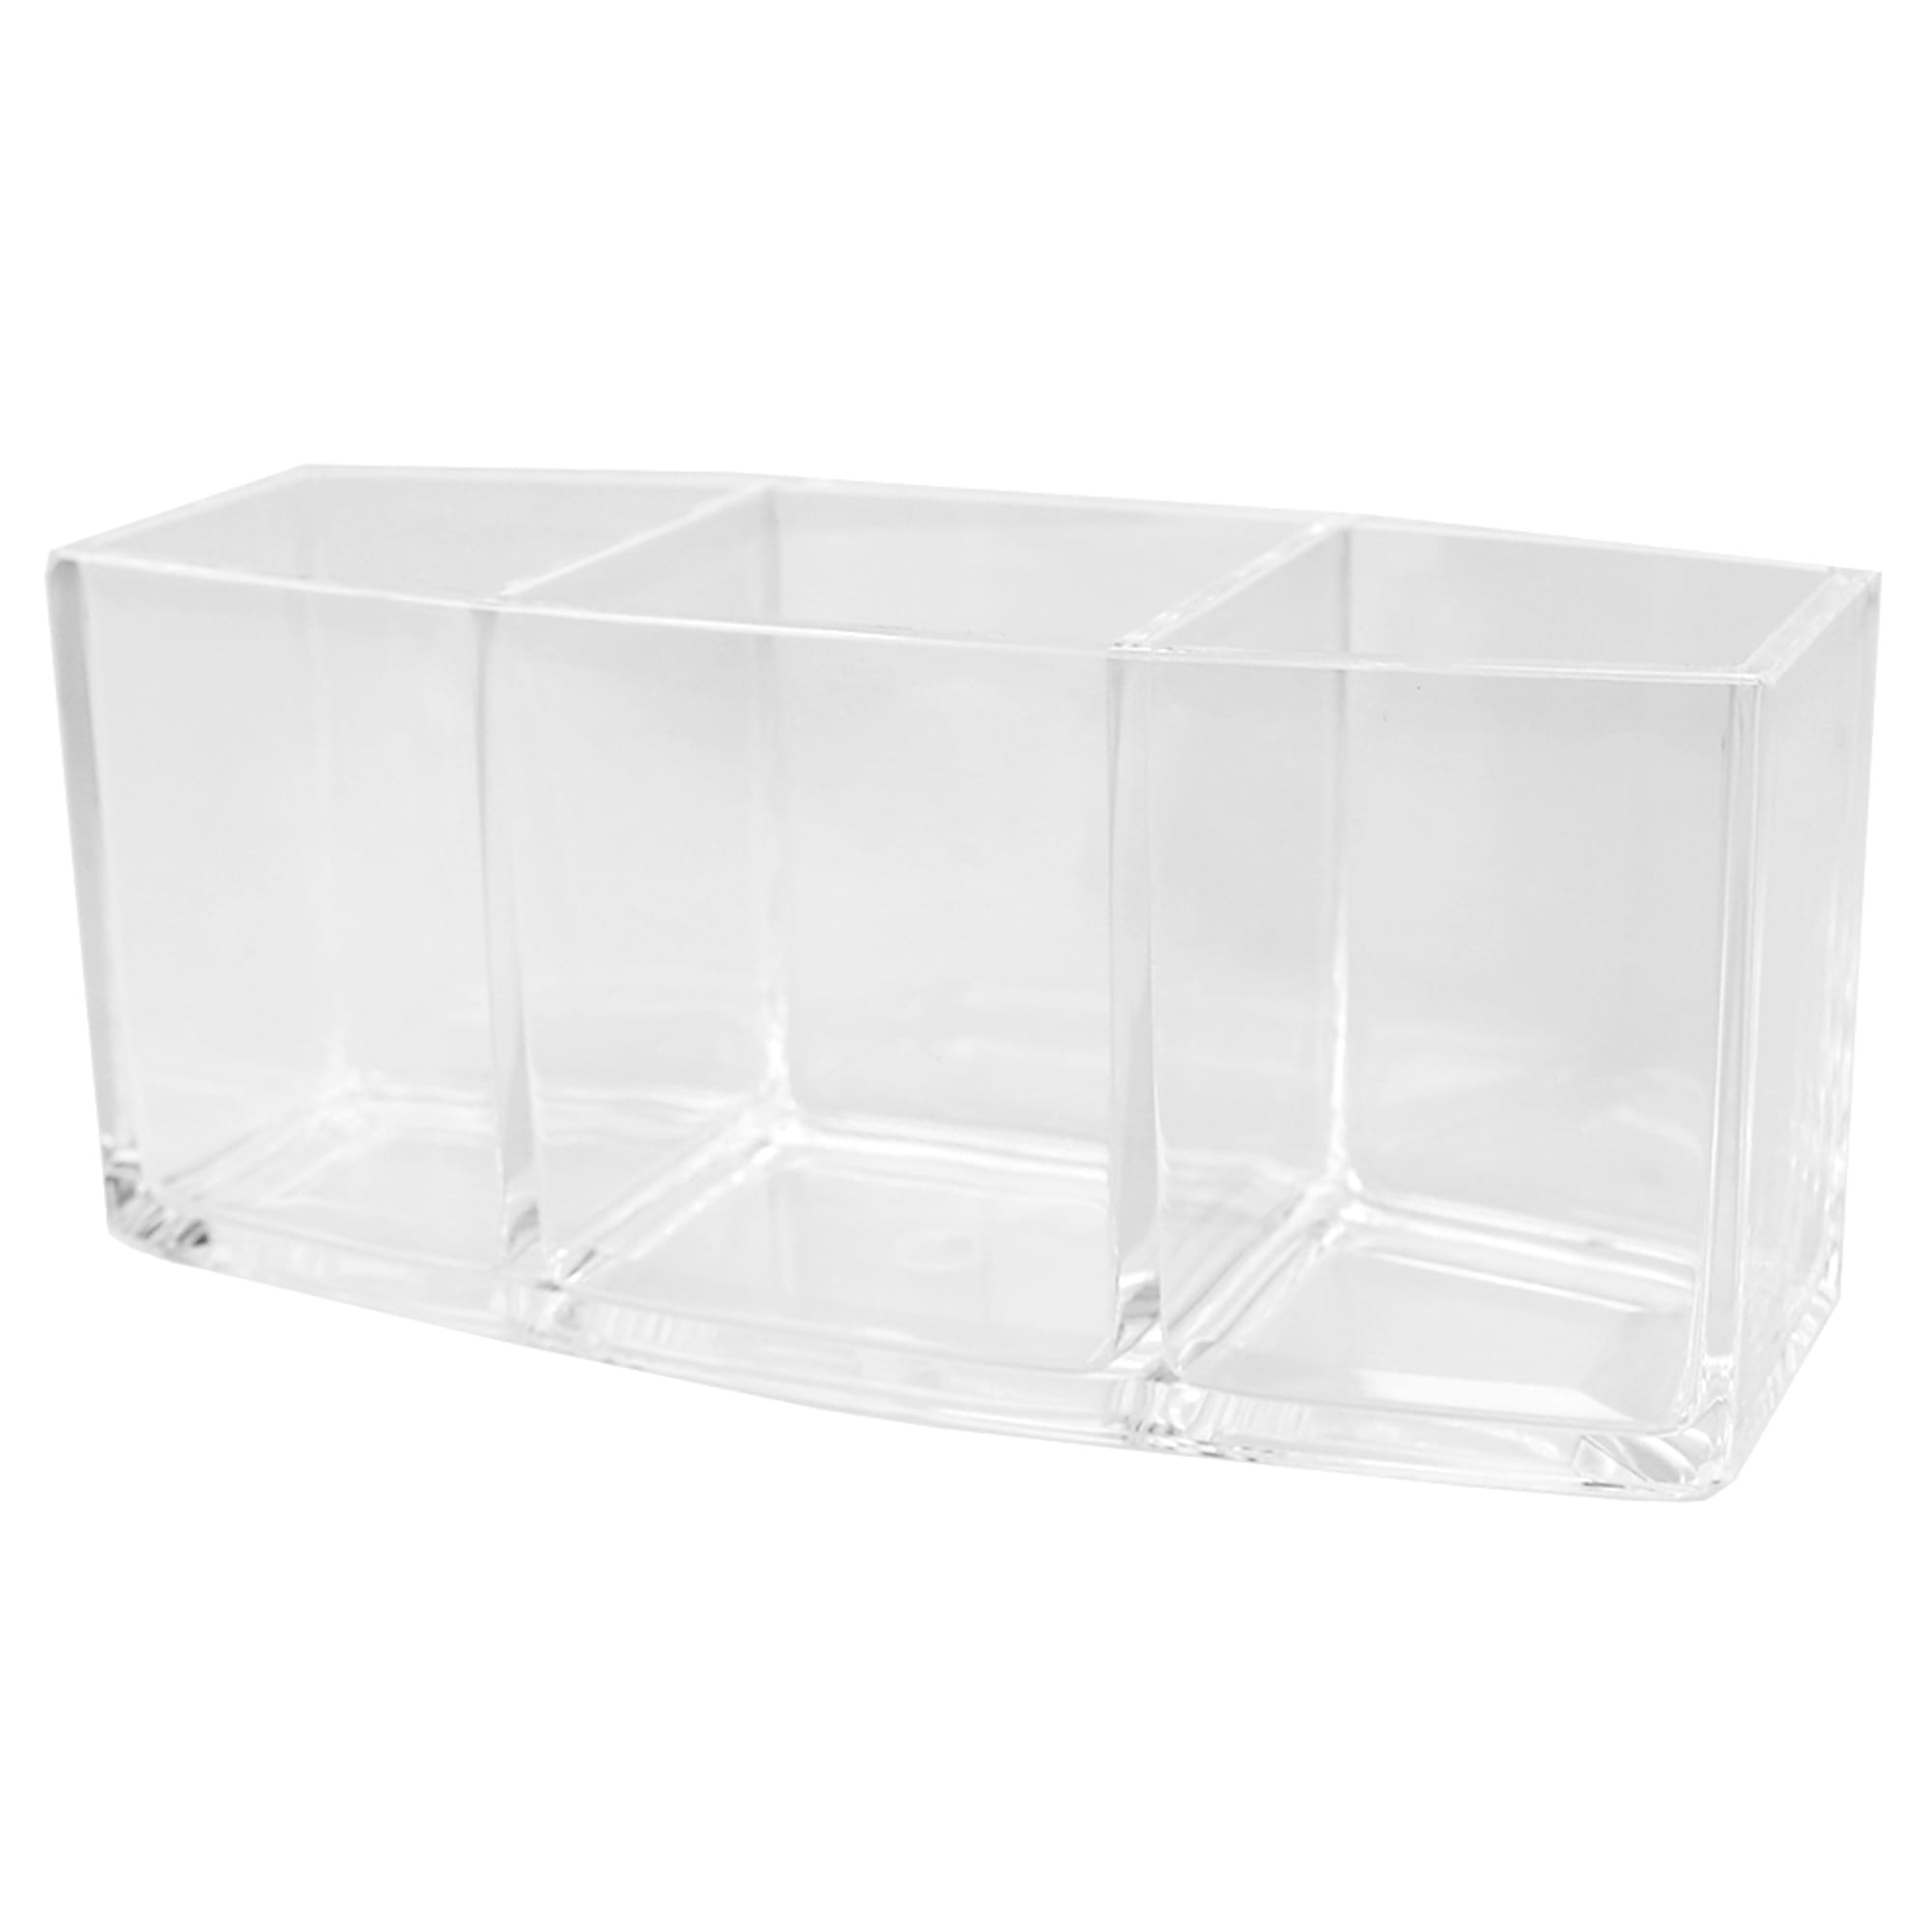 Home Basics 3 Compartment Plastic Make Up Organizer, Clear $3.00 EACH, CASE PACK OF 12